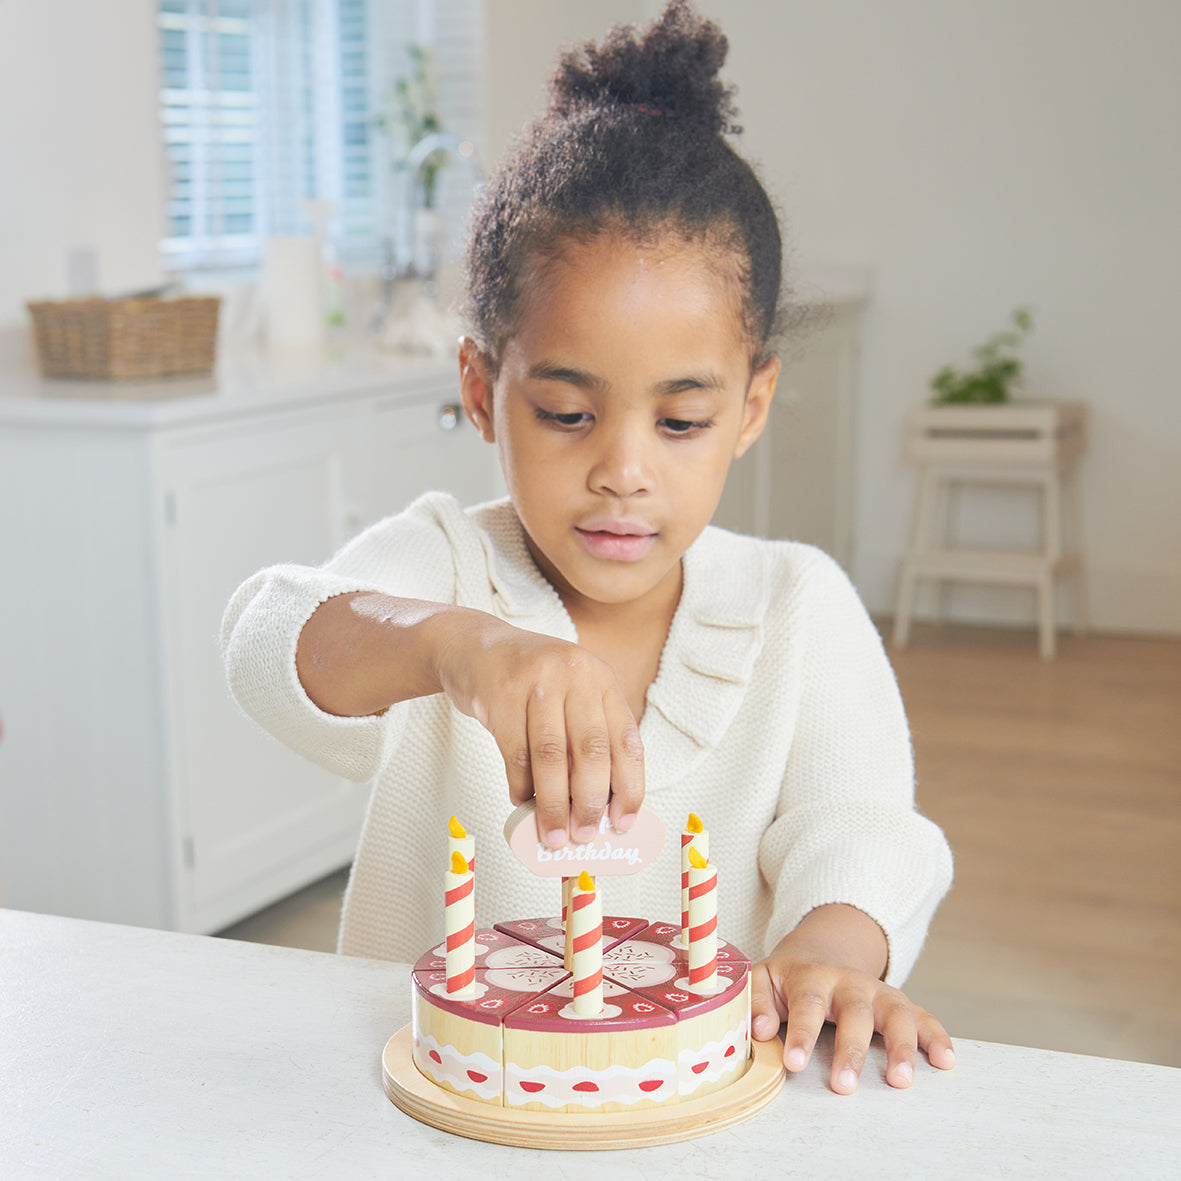 Child placing cake topper onto wooden toy chocolate birthday cake with six candles.  The cake is divided into six pieces and presented on a wooden plate.